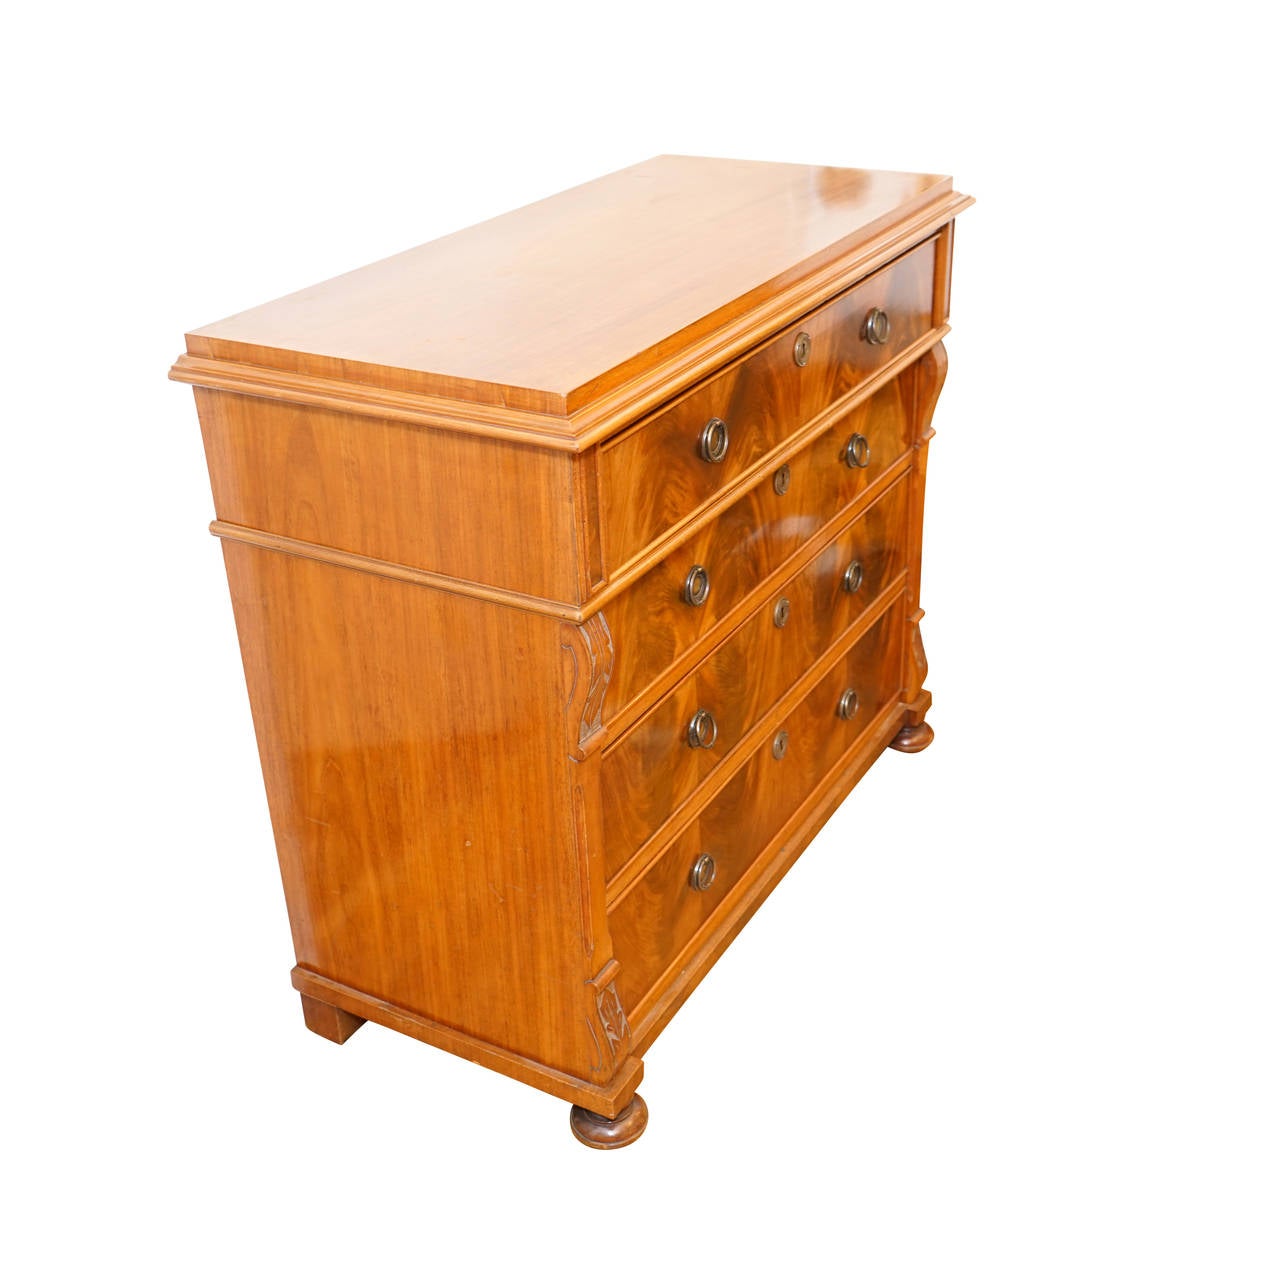 This solid mahogany and fir chest of drawers with flame mahogany veneers, is from a region of Sweden, famous for its finely crafted furniture in the last quarter of the nineteenth century.  The town was Lindome and the period was Renaissance